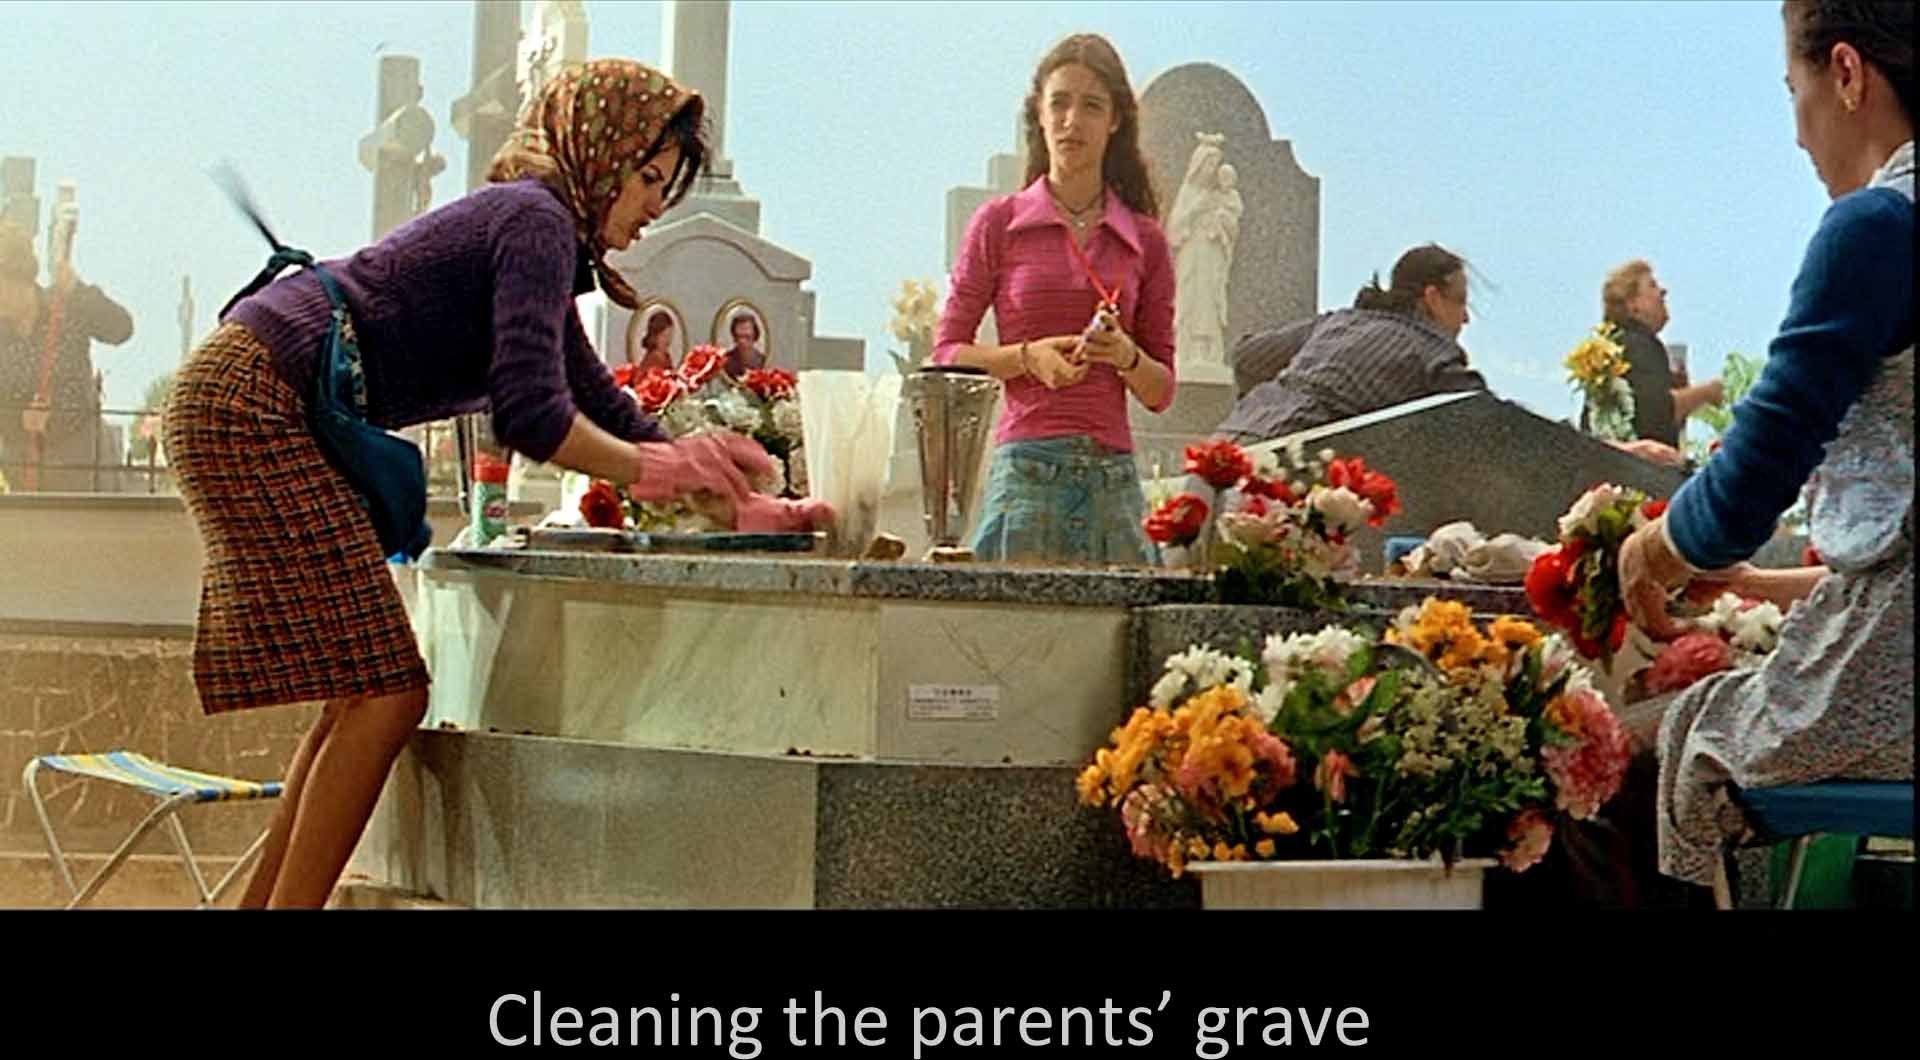 Cleaning the parents’ grave